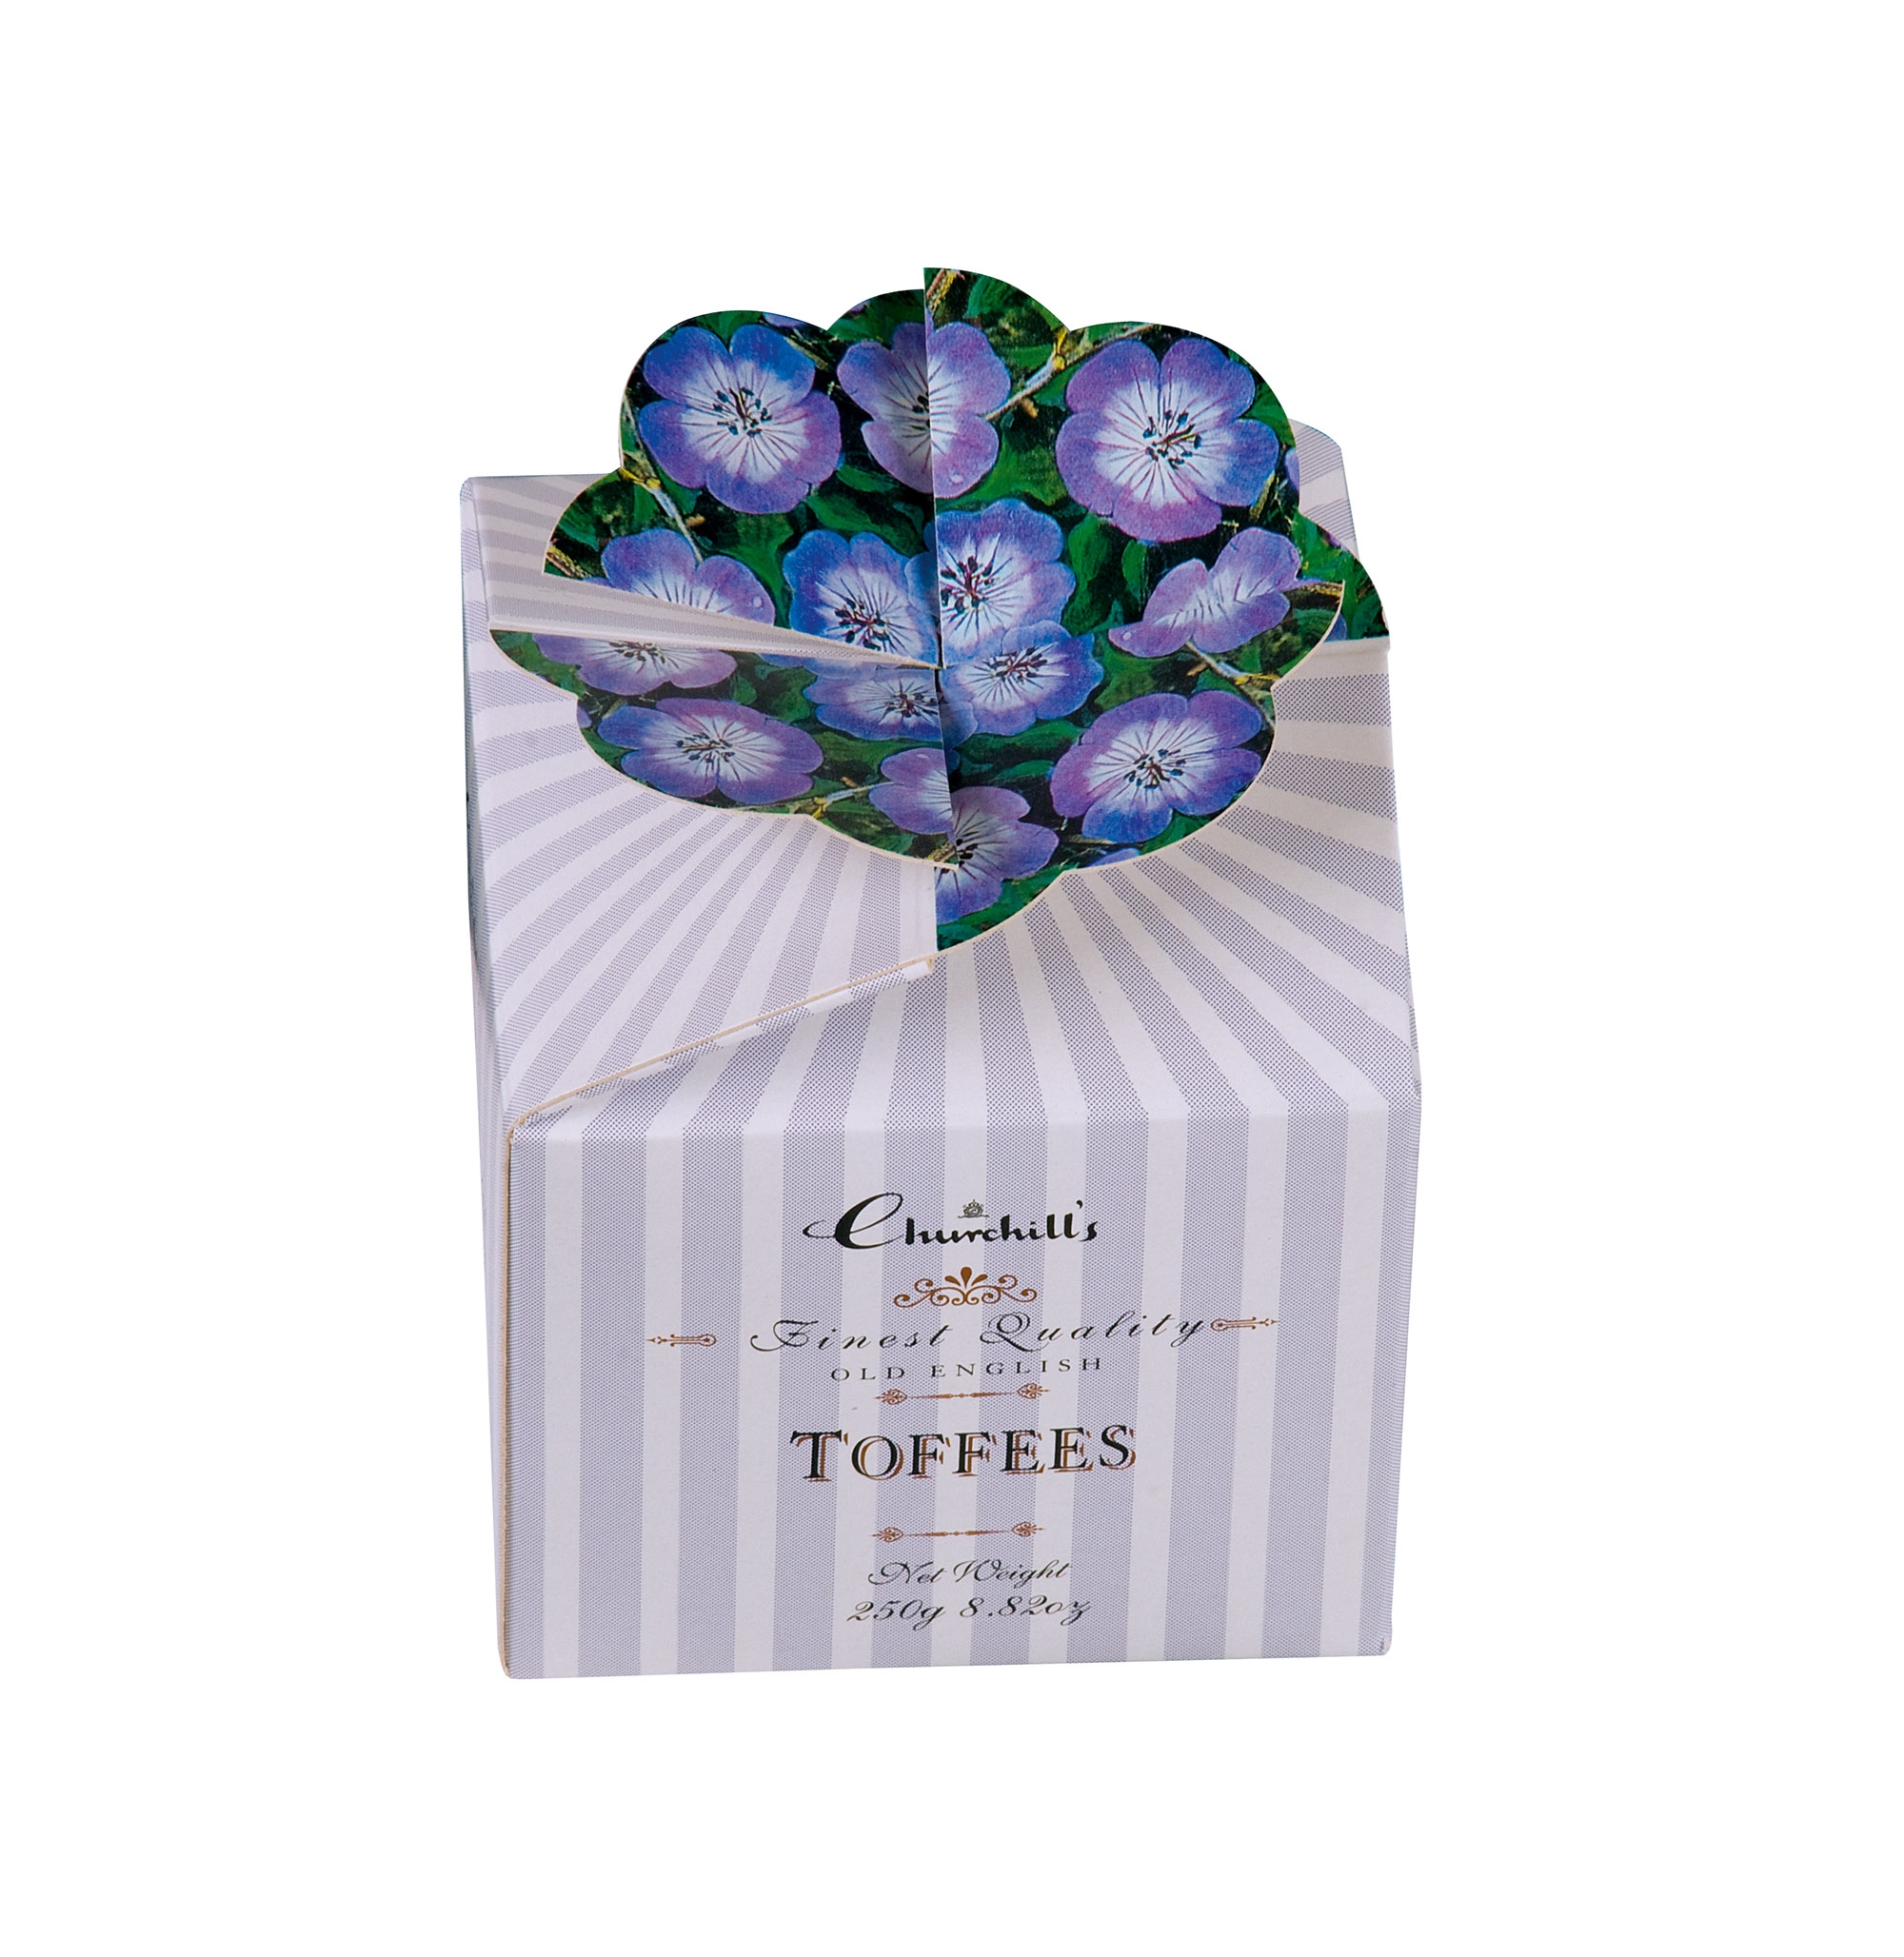 Floral Bouquet Toffee – 250g English Toffee – Churchills Confectionary